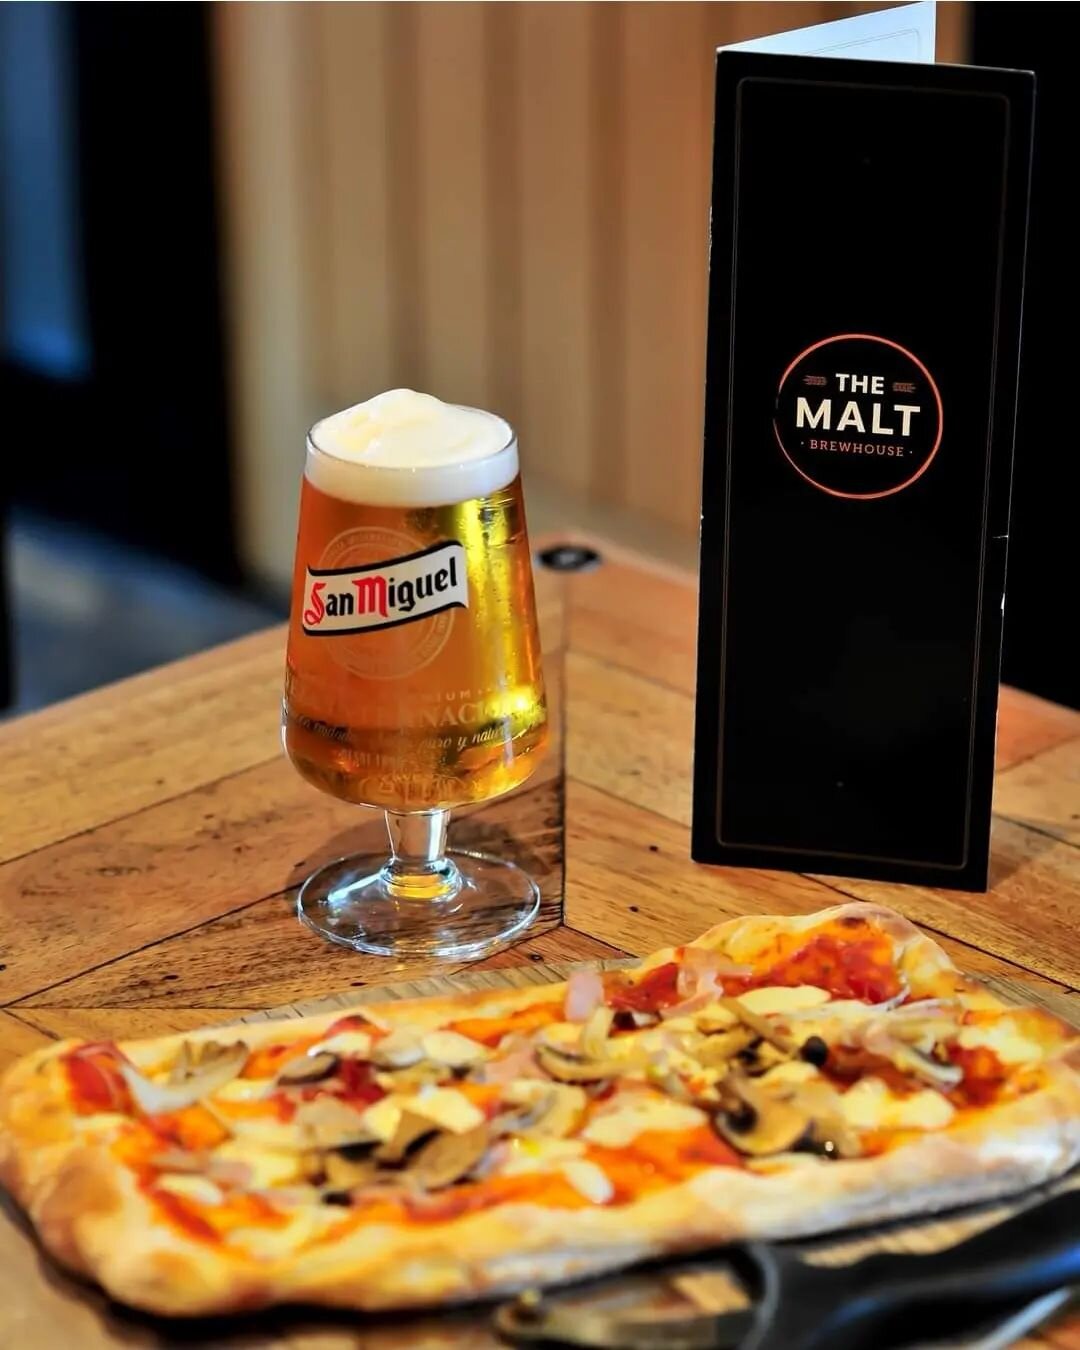 Anyone fancy a cheeky pint and pizza?
We're open from 12pm to satisfy all your needs 🍻

#saturdaynightdrinks #foodanddrinks #pizza #themaltbrewhouse